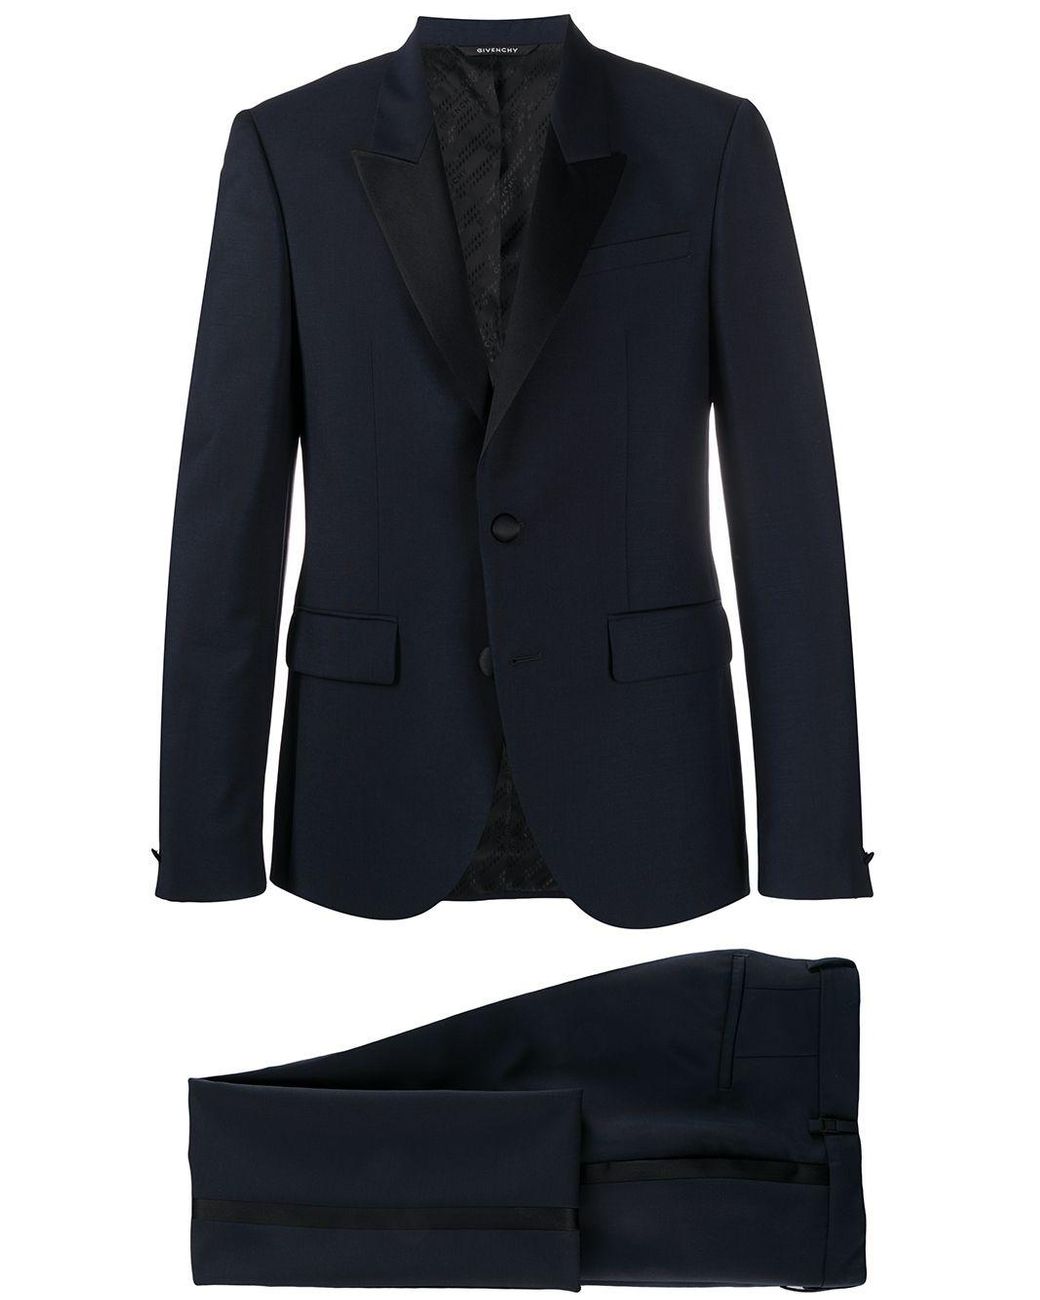 Givenchy Wool Single-breasted Suit in Blue for Men - Save 58% - Lyst